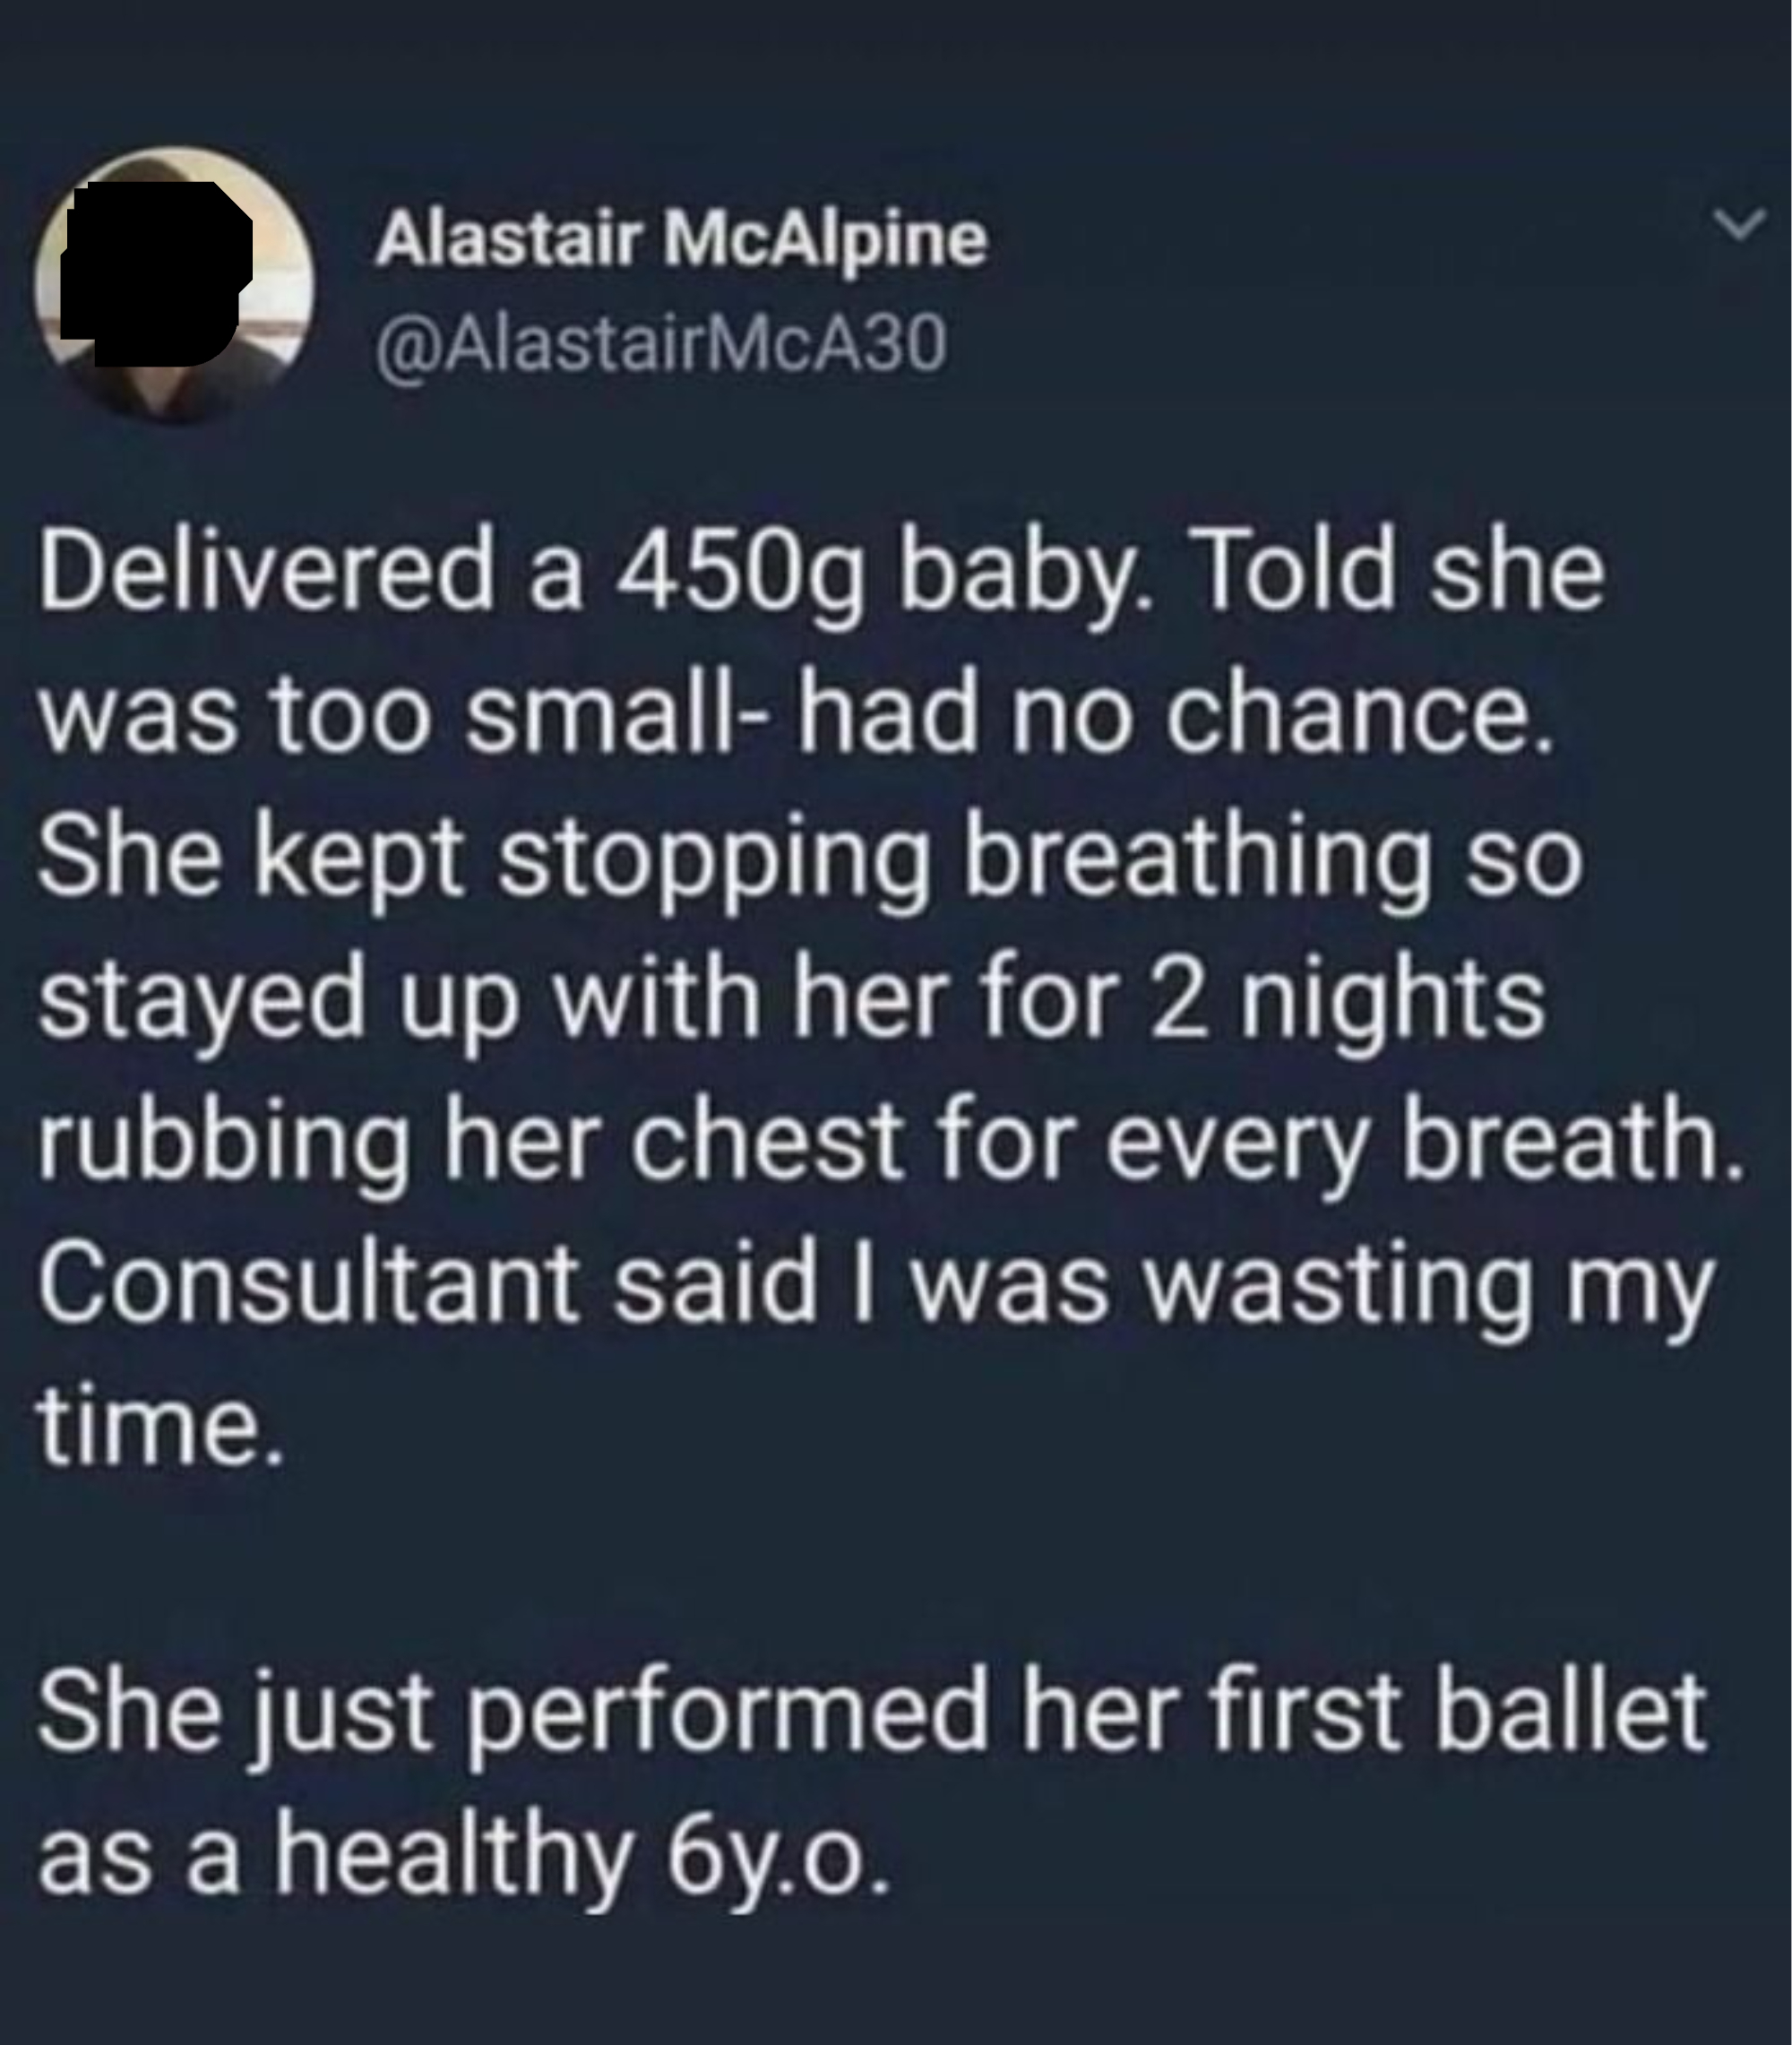 Someone who delivered a tiny, premature baby and stayed up with her for 2 nights, rubbing her chest for every breath, and was told they were wasting their time got an update that the kid just performed her first ballet as a healthy 6-year-old